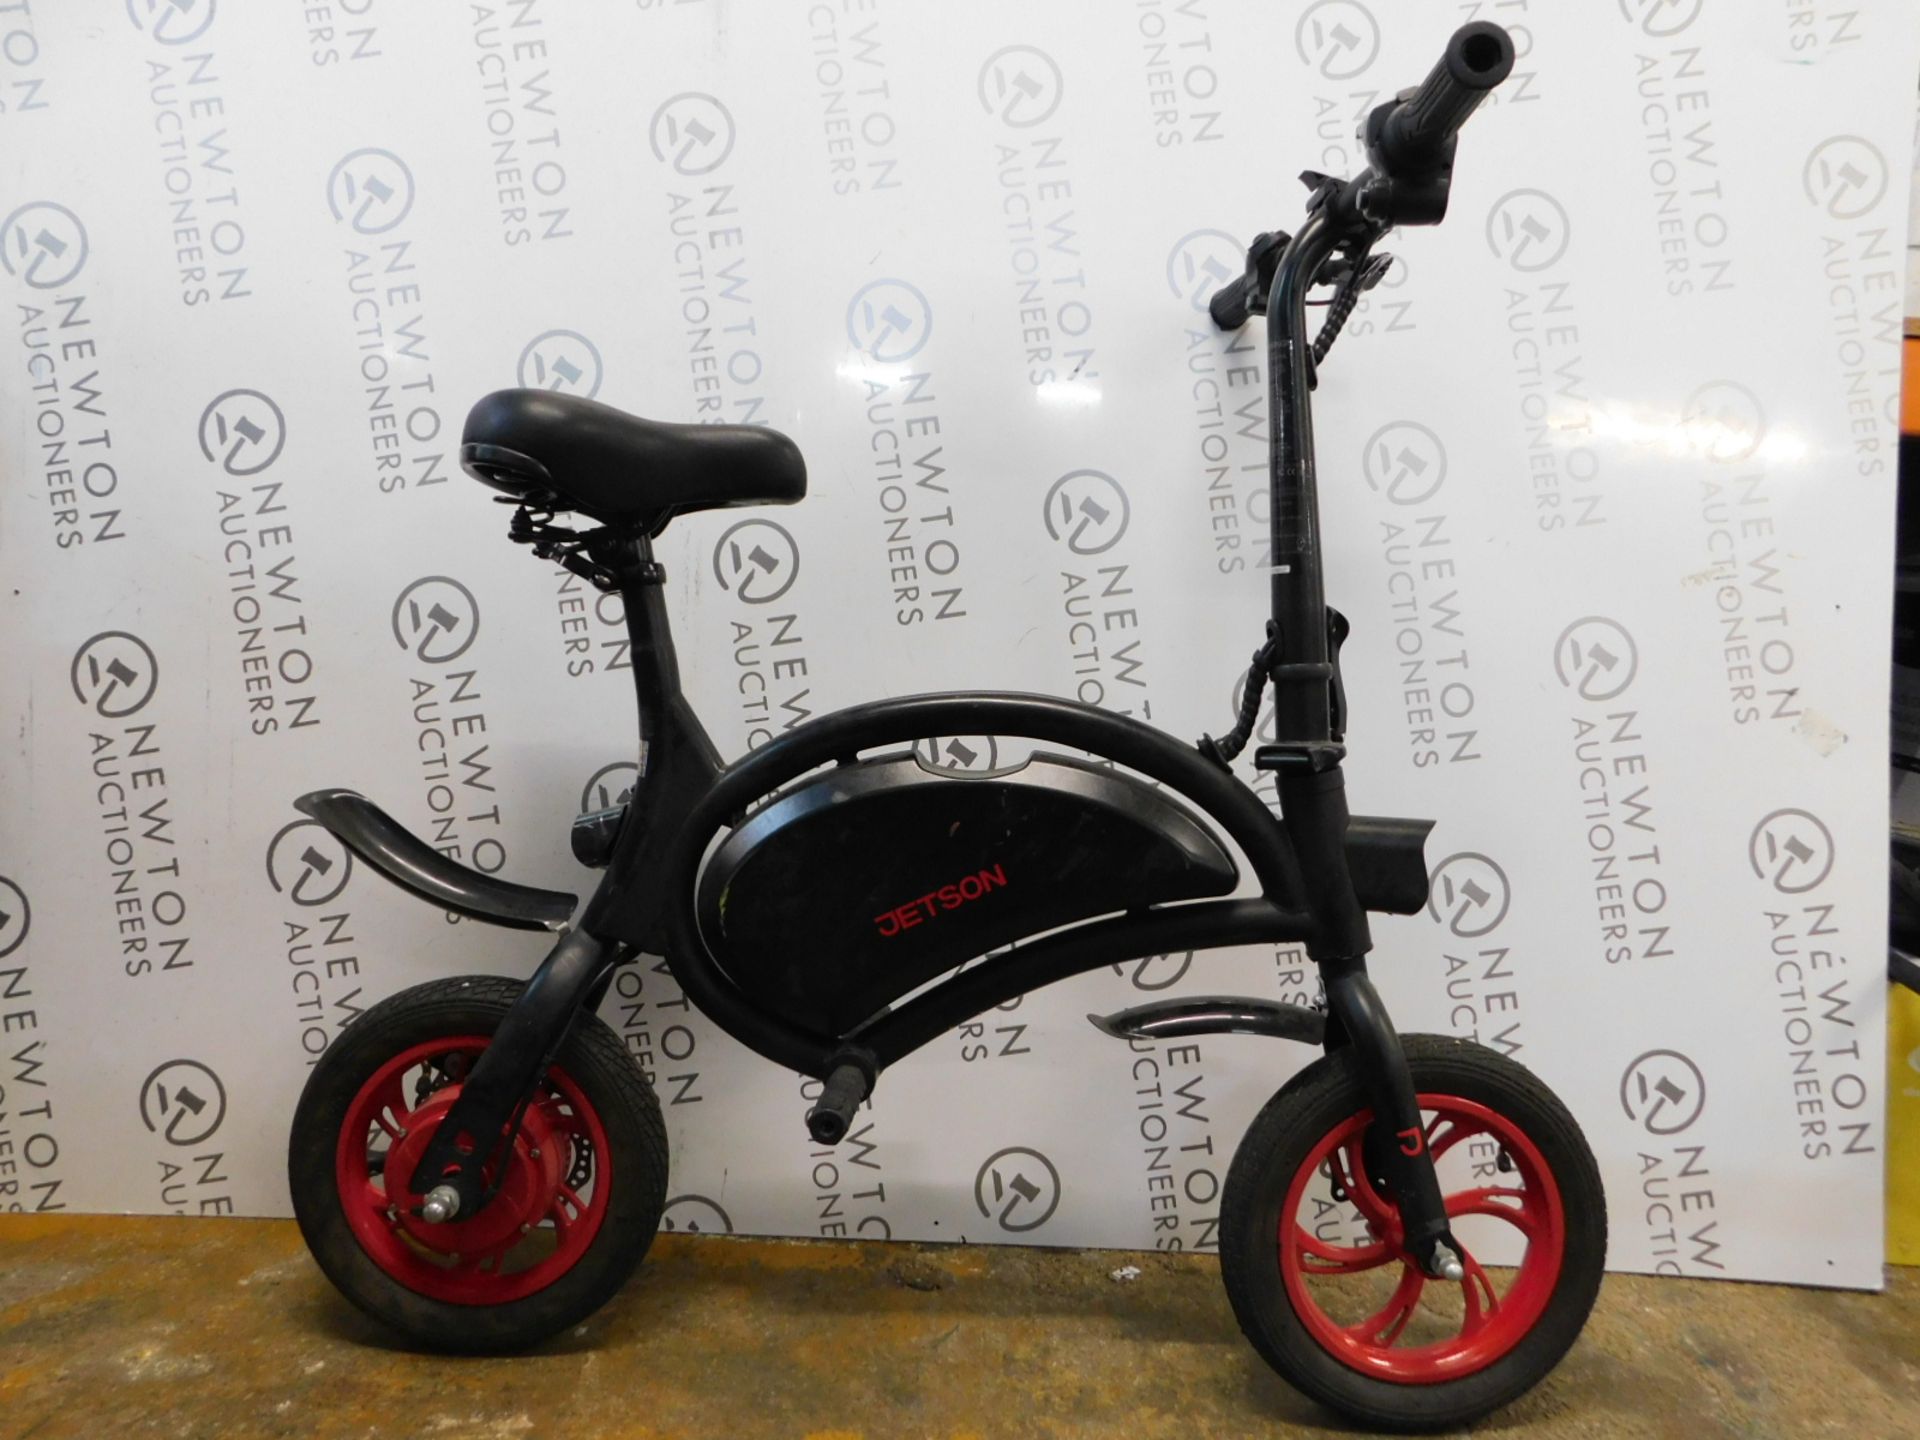 1 JETSON BOLT FOLDING ELECTRIC RIDE-ON SCOOTER (NO CHARGER) RRP Â£399